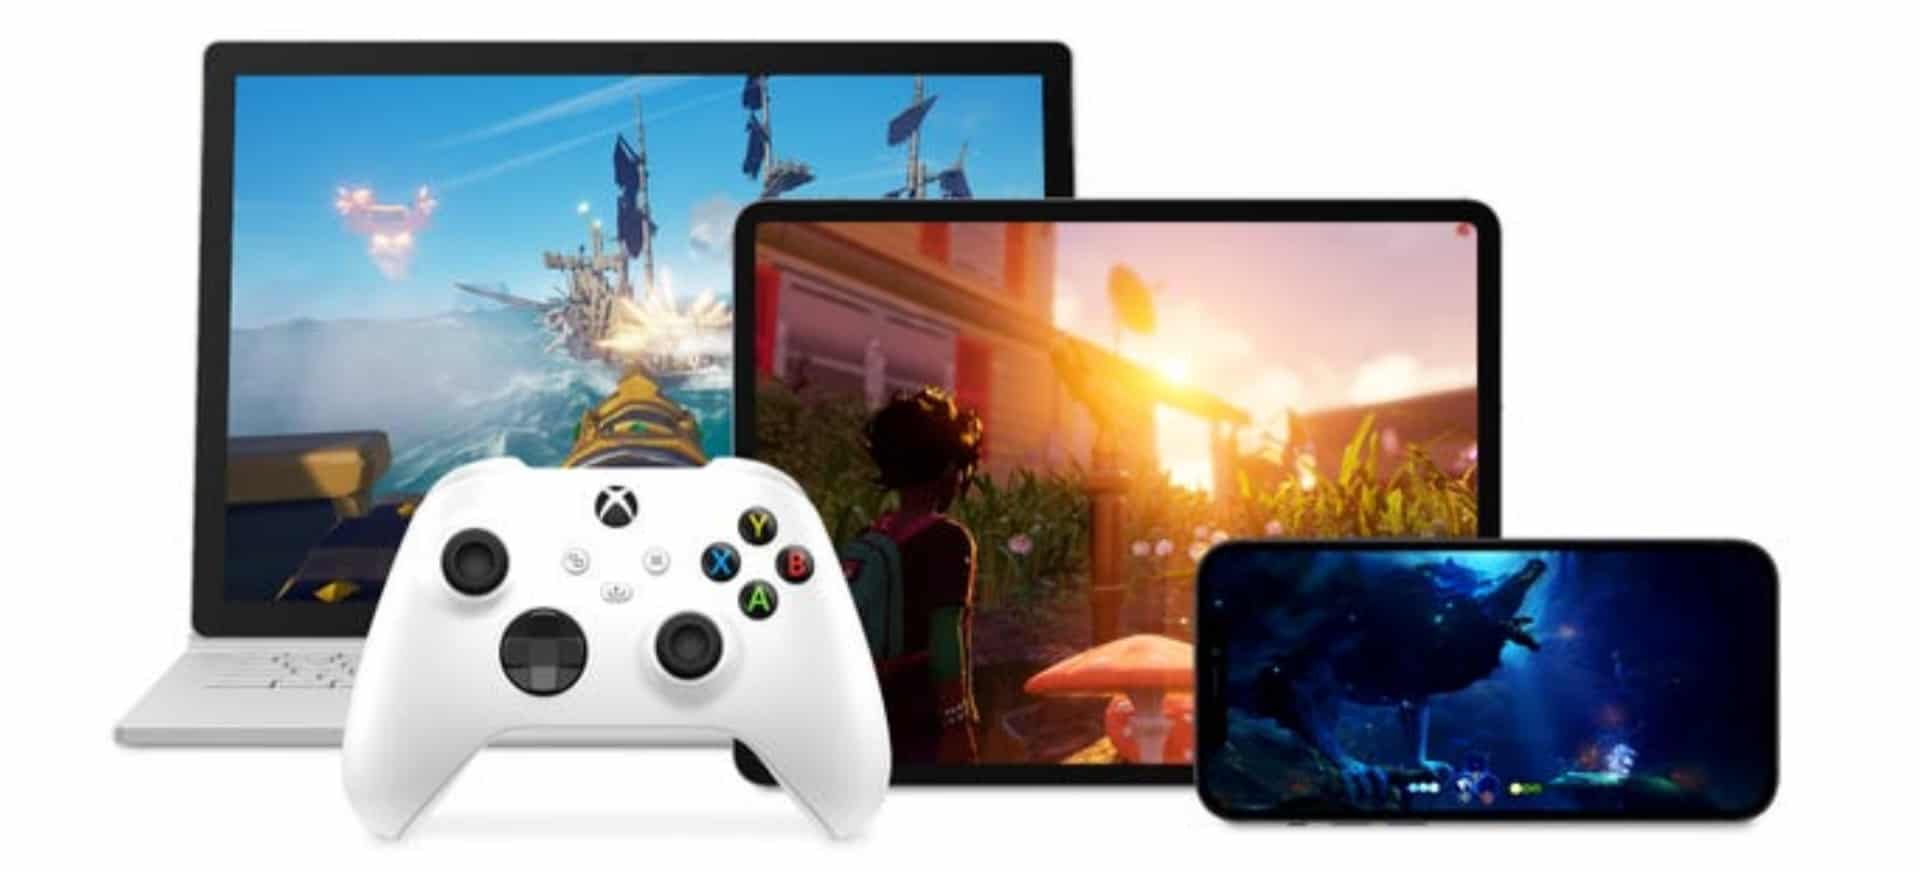 Microsoft is Expanding Testing of Xbox Cloud Gaming on Windows PC and Apple iOS